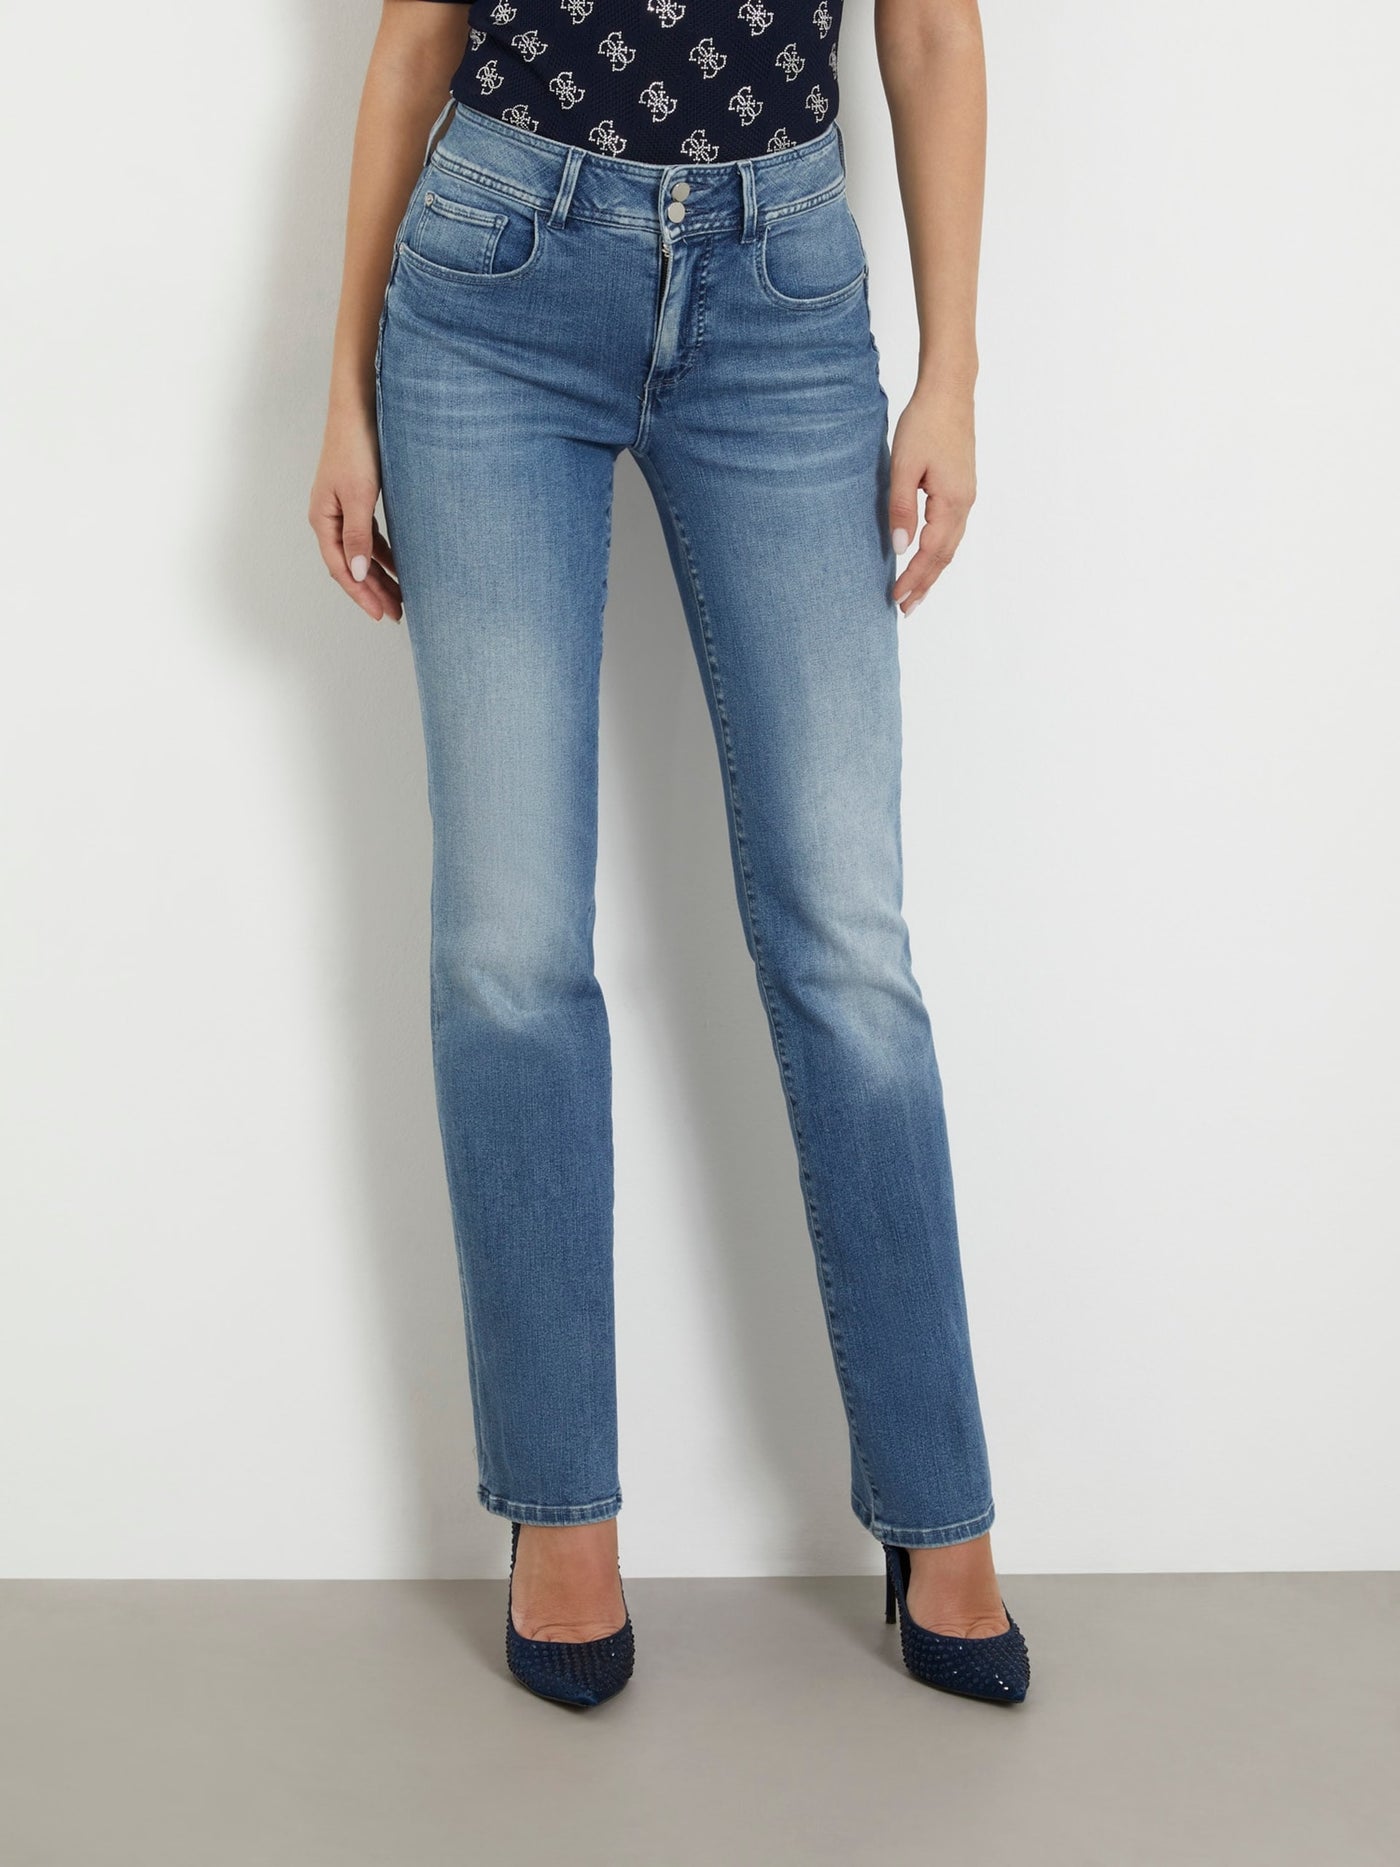 Guess - Jeans straight shape up